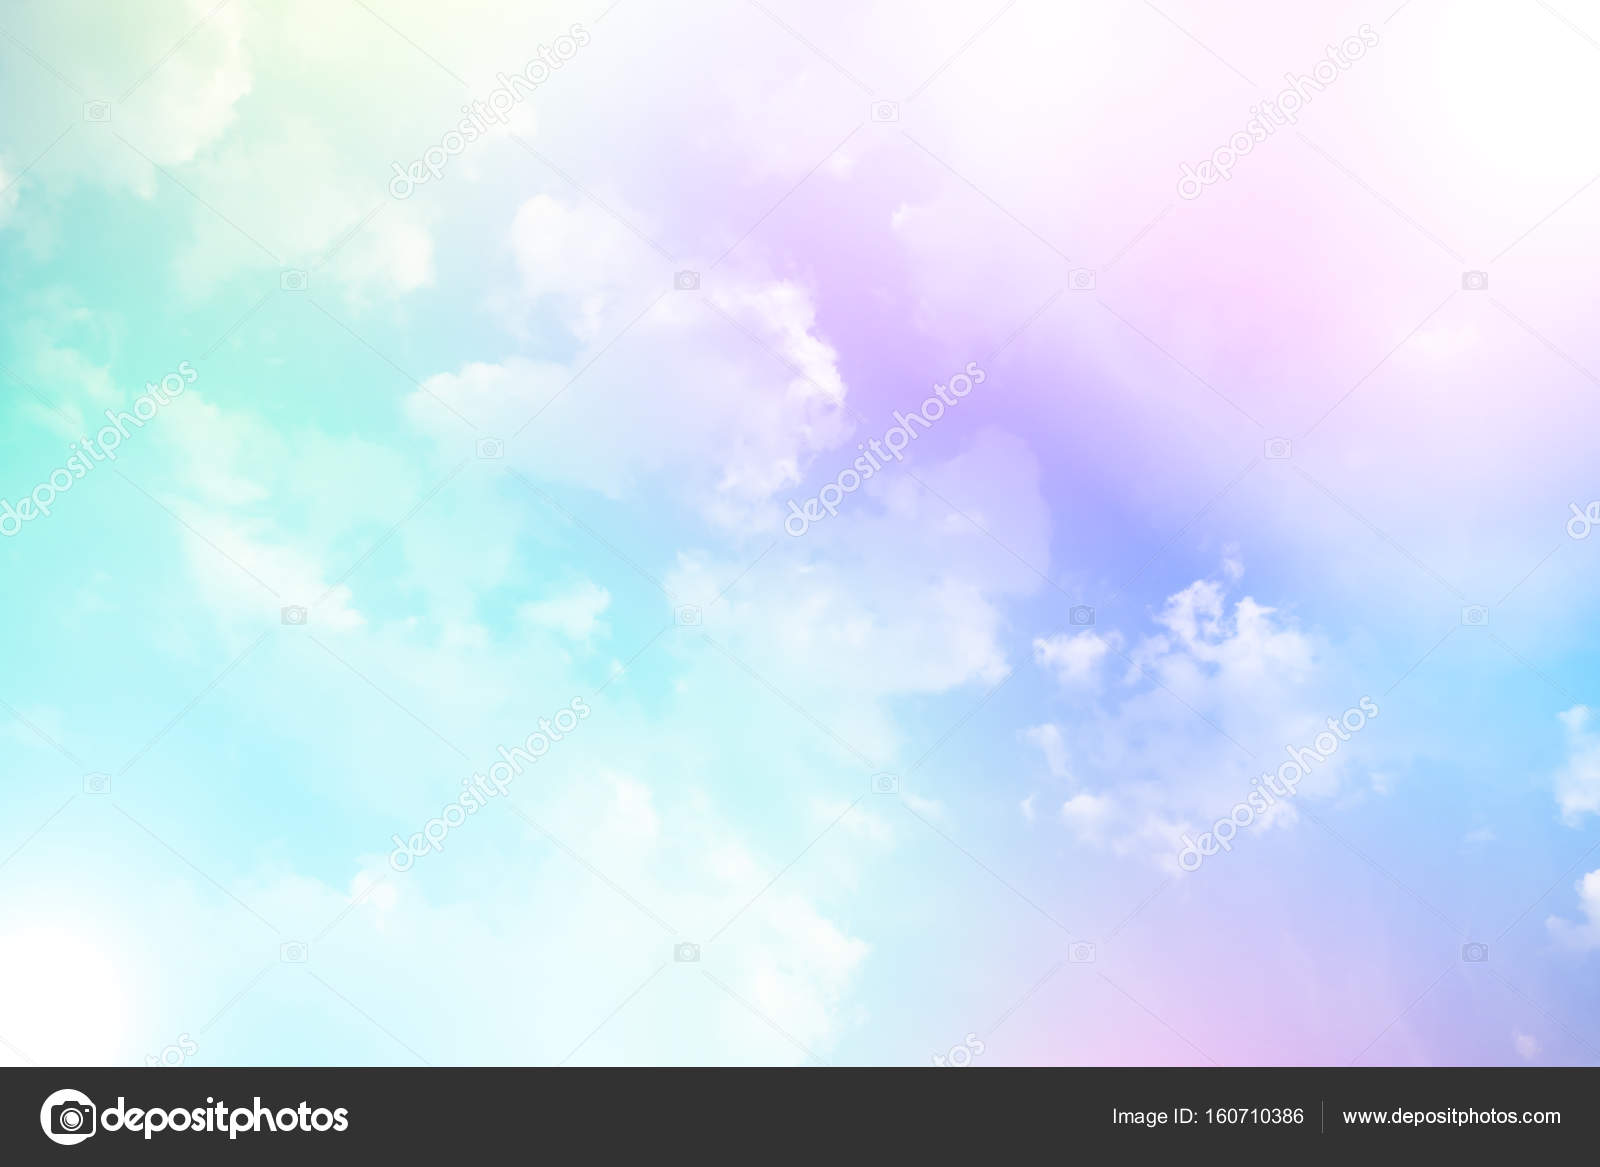 Magic night blue sky background with sparkling Vector Image